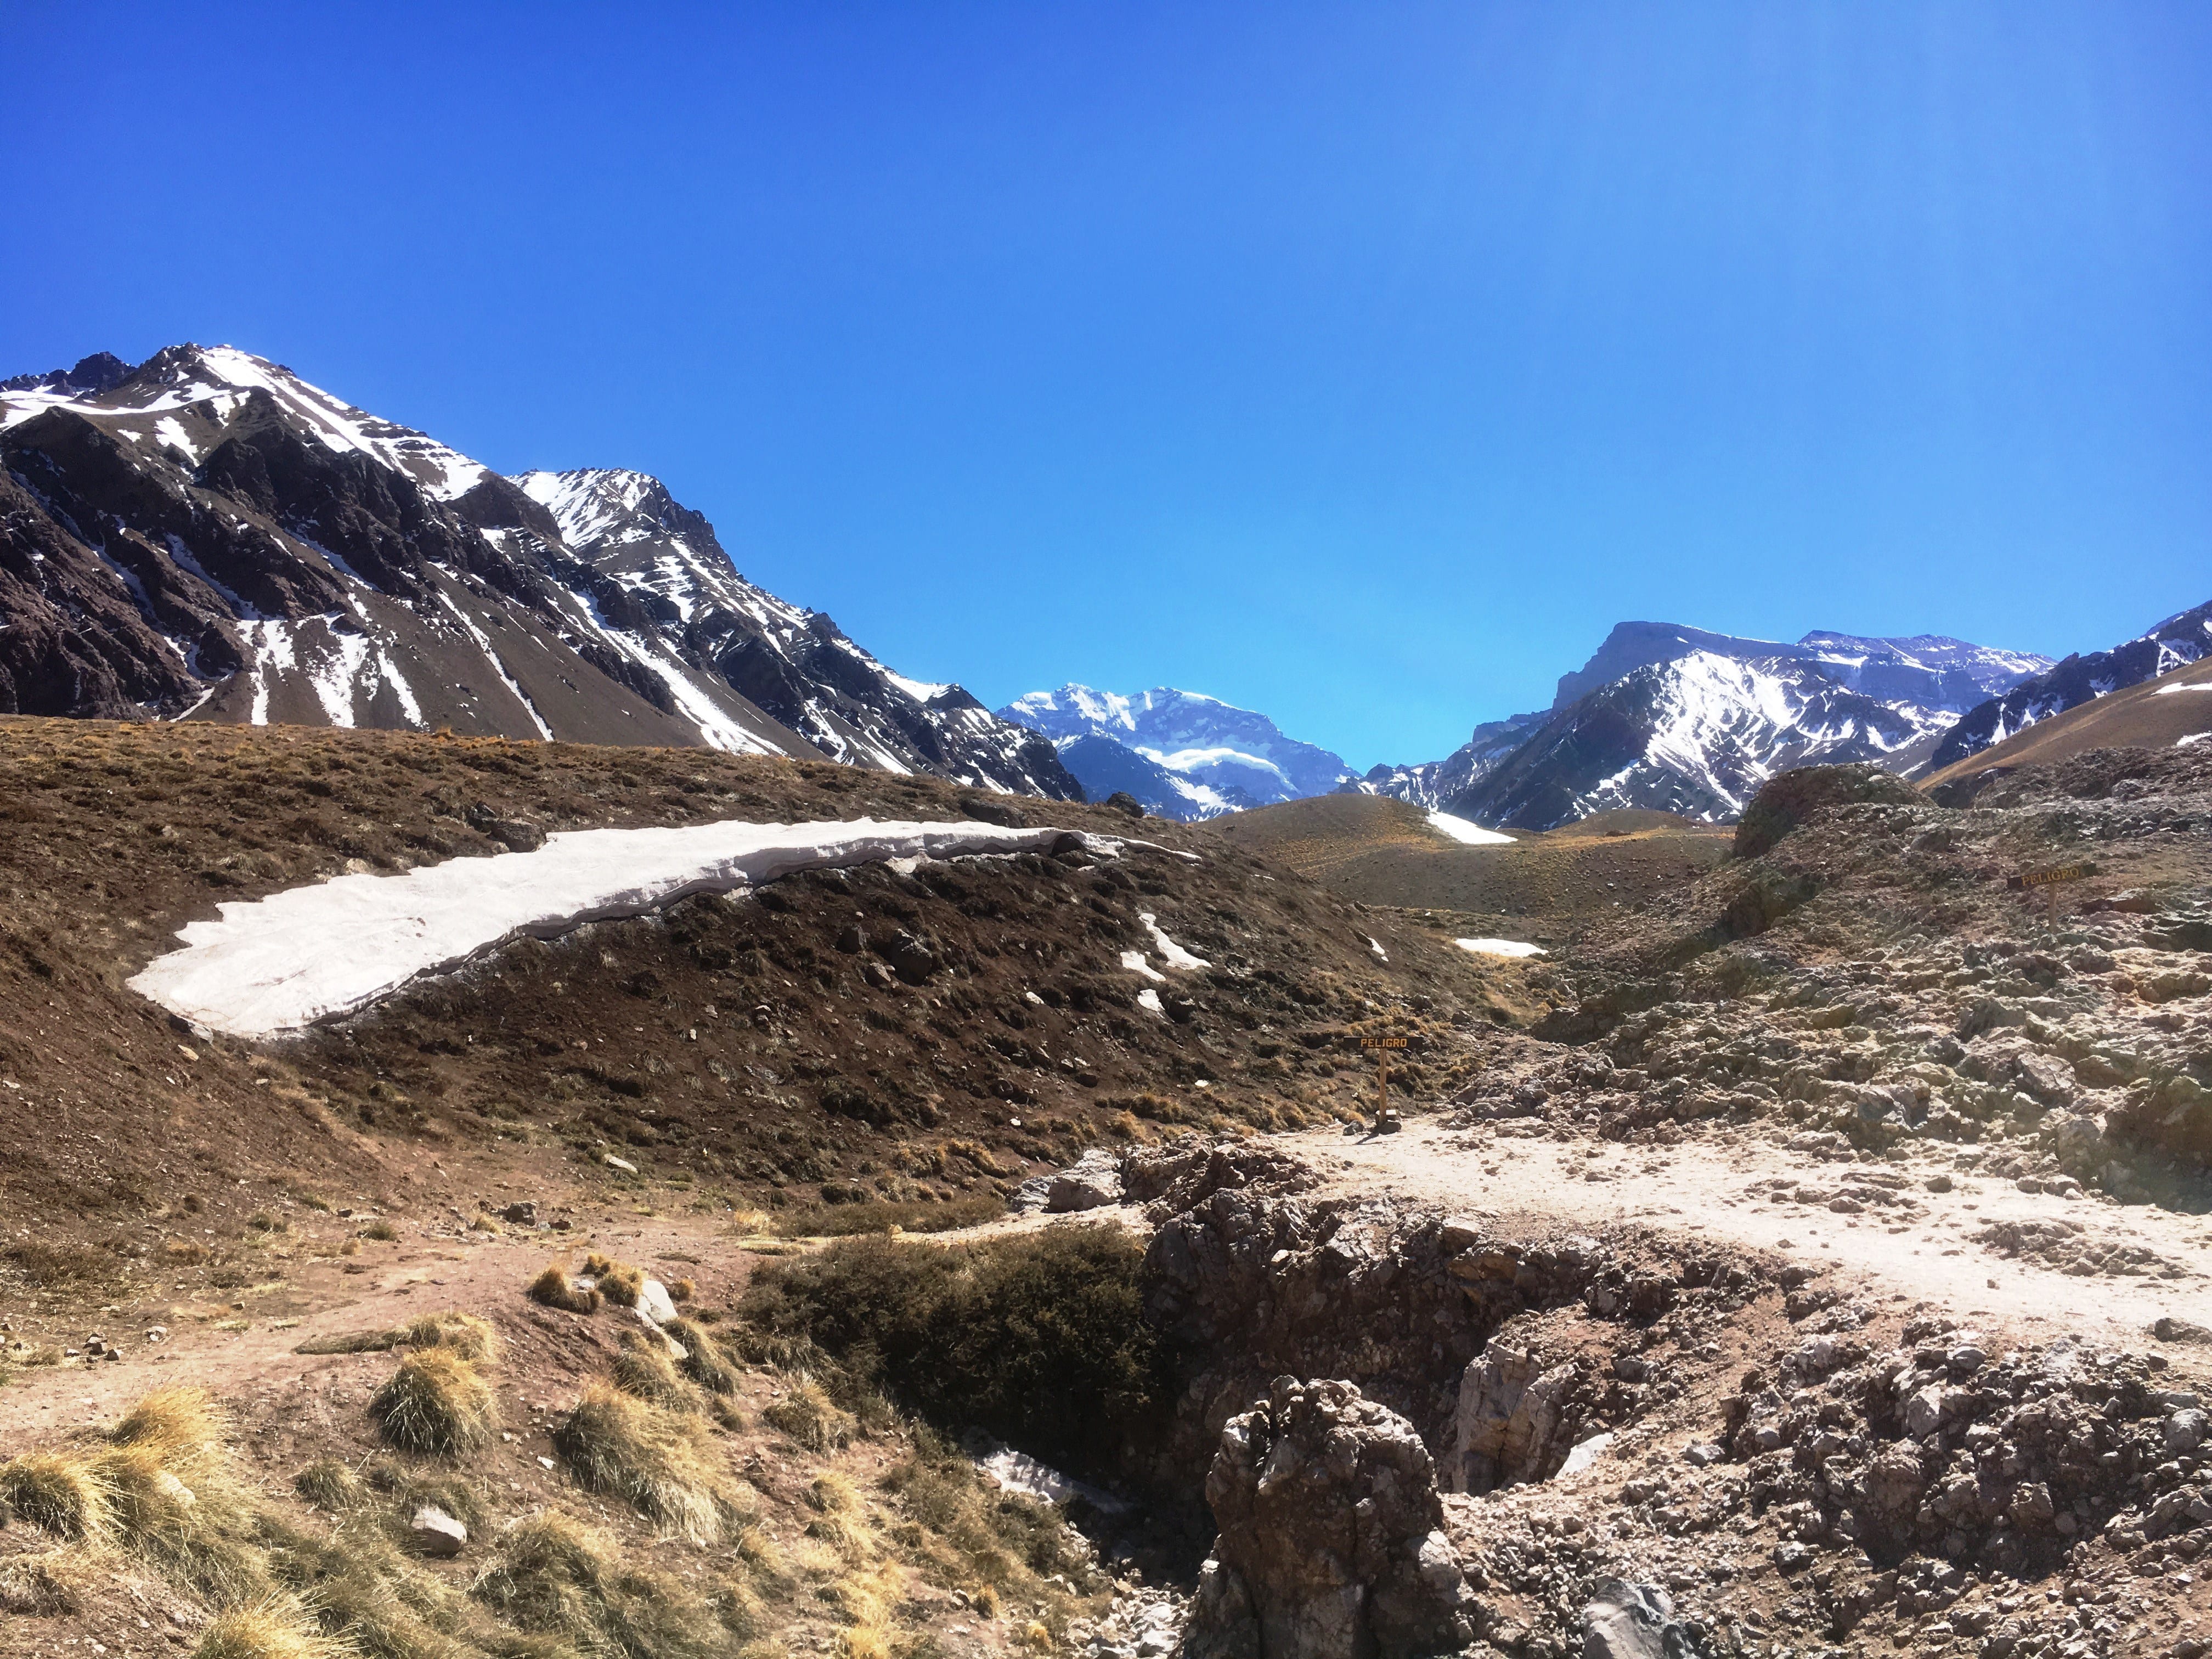 Argentina: Andes Mountains | UD Abroad Blog